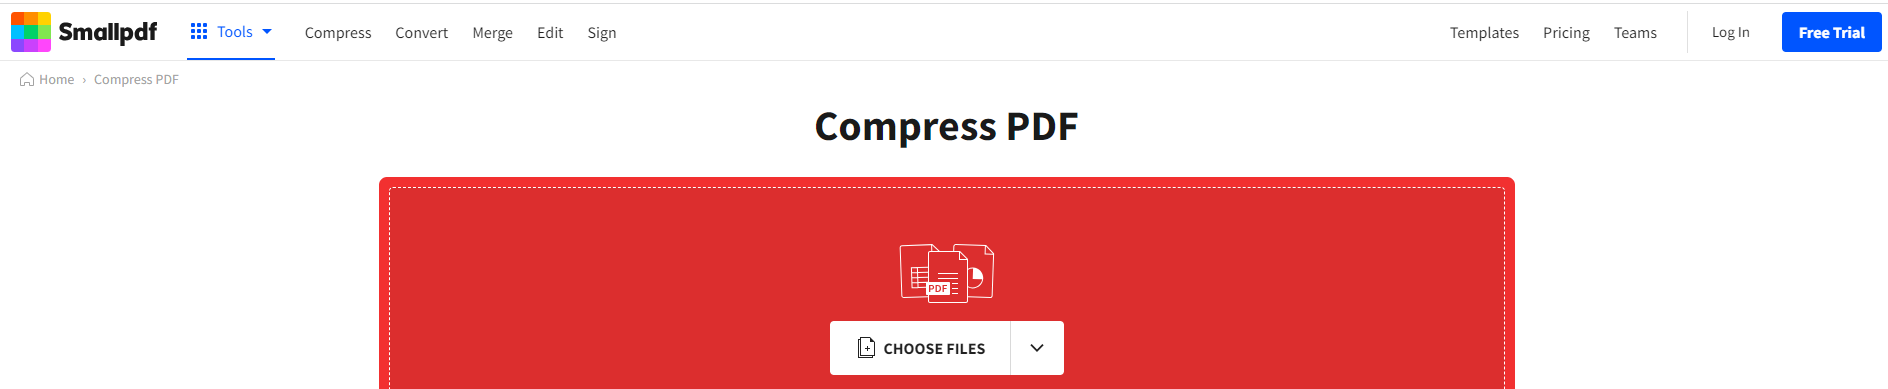 Compress PDF to 100KB with Smallpdf